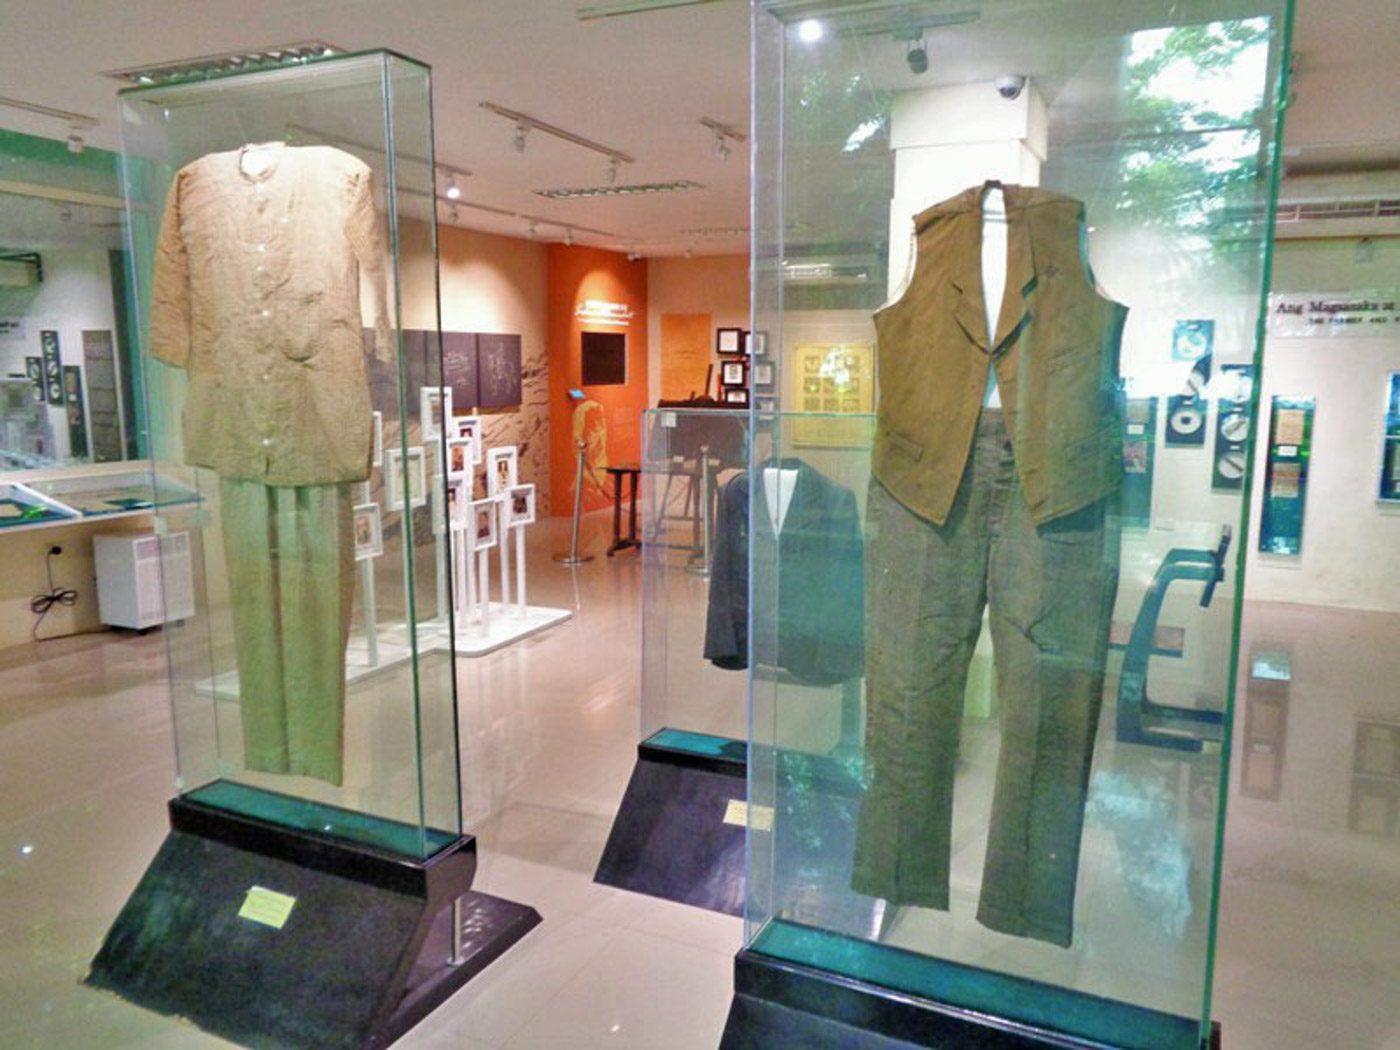 CLOTHING. Also in the museum are Rizal's personal effects like his clothes, as well as other possessions like his medical tools. Photo courtesy of Gabriel Martinez Cad 